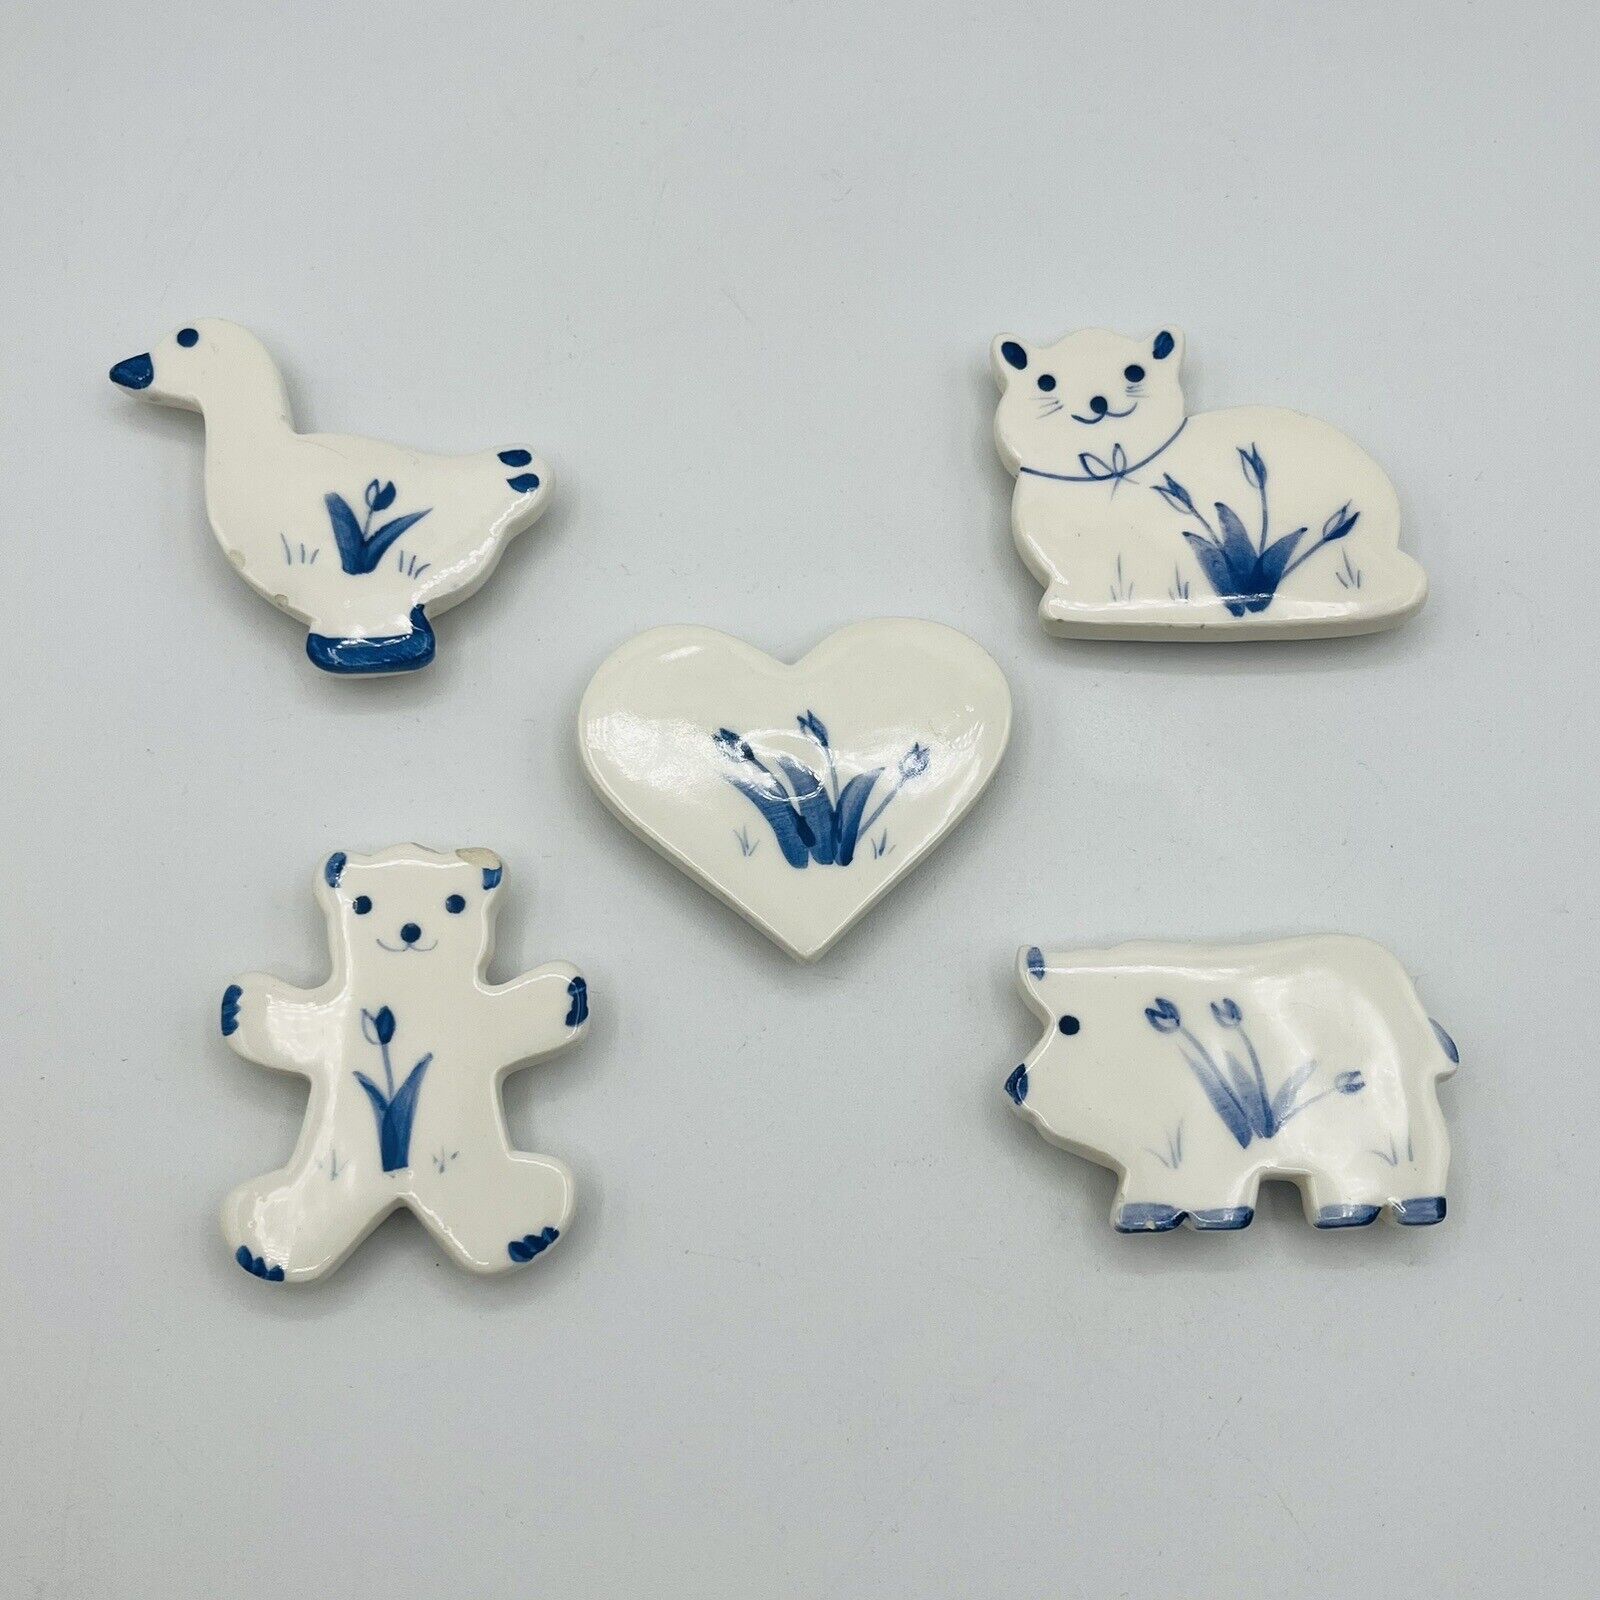 Vintage Handpainted Blue And White Ceramic Animal Magnets